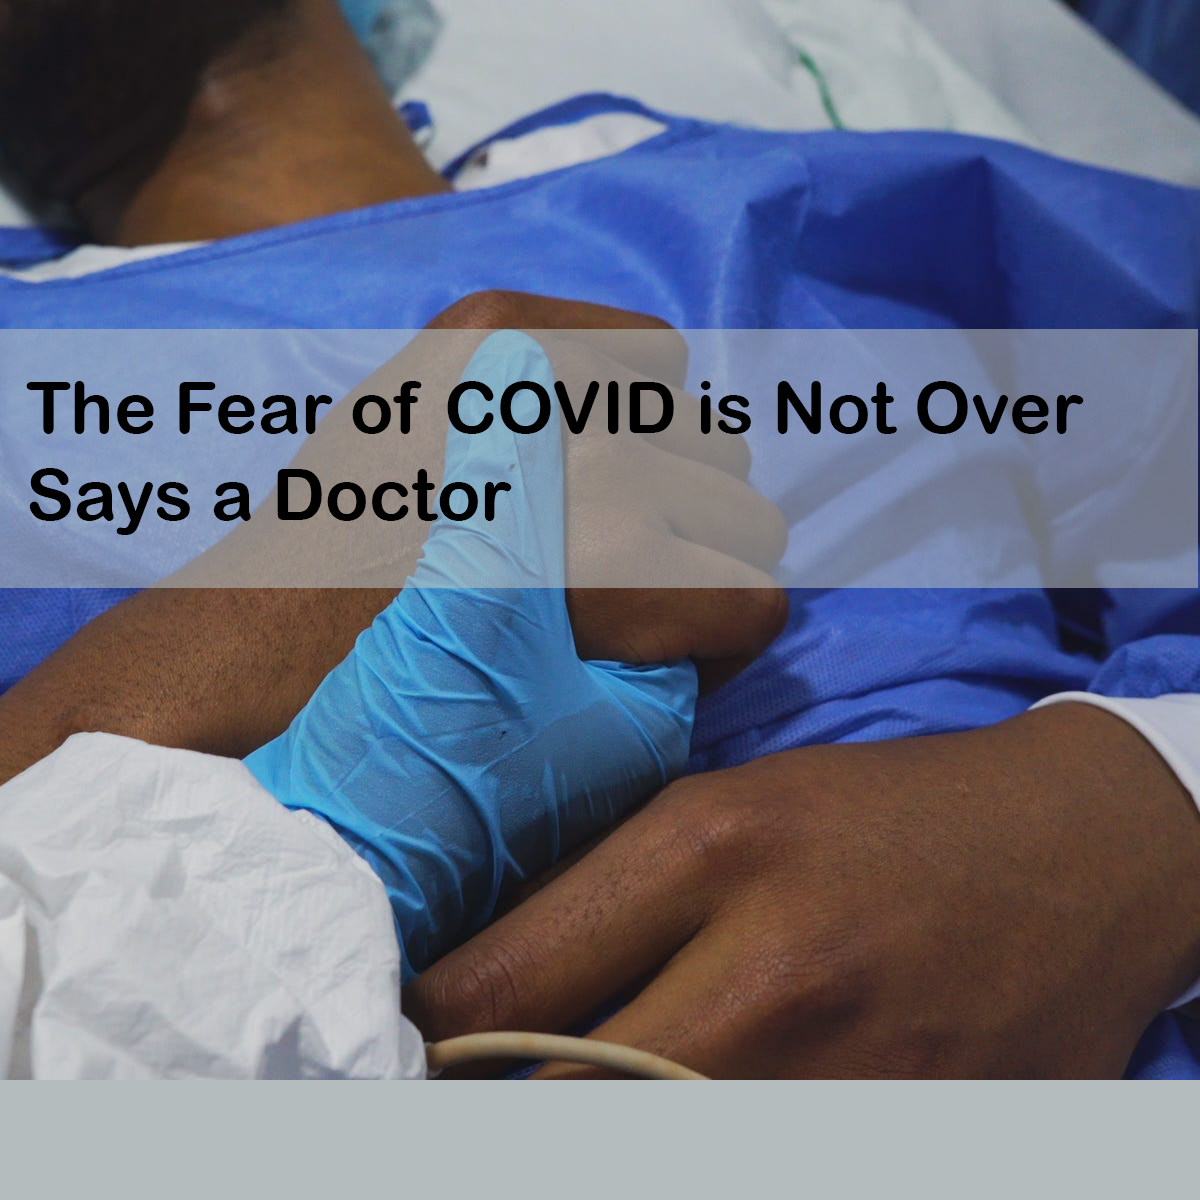 The Fear of COVID is Not Over Says a Doctor